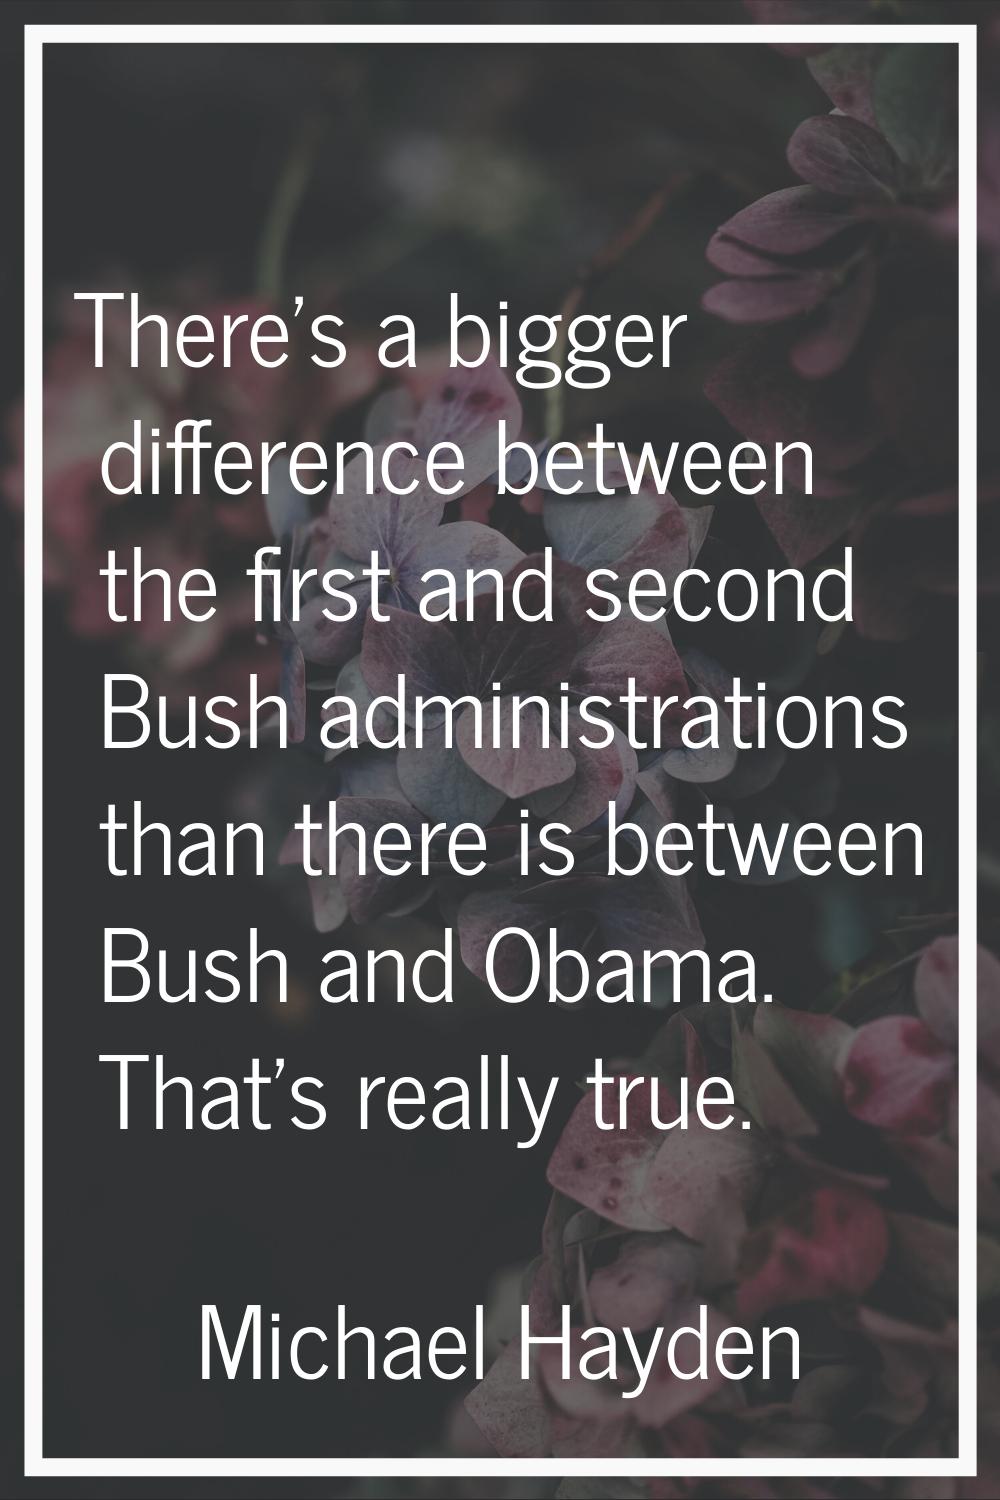 There's a bigger difference between the first and second Bush administrations than there is between